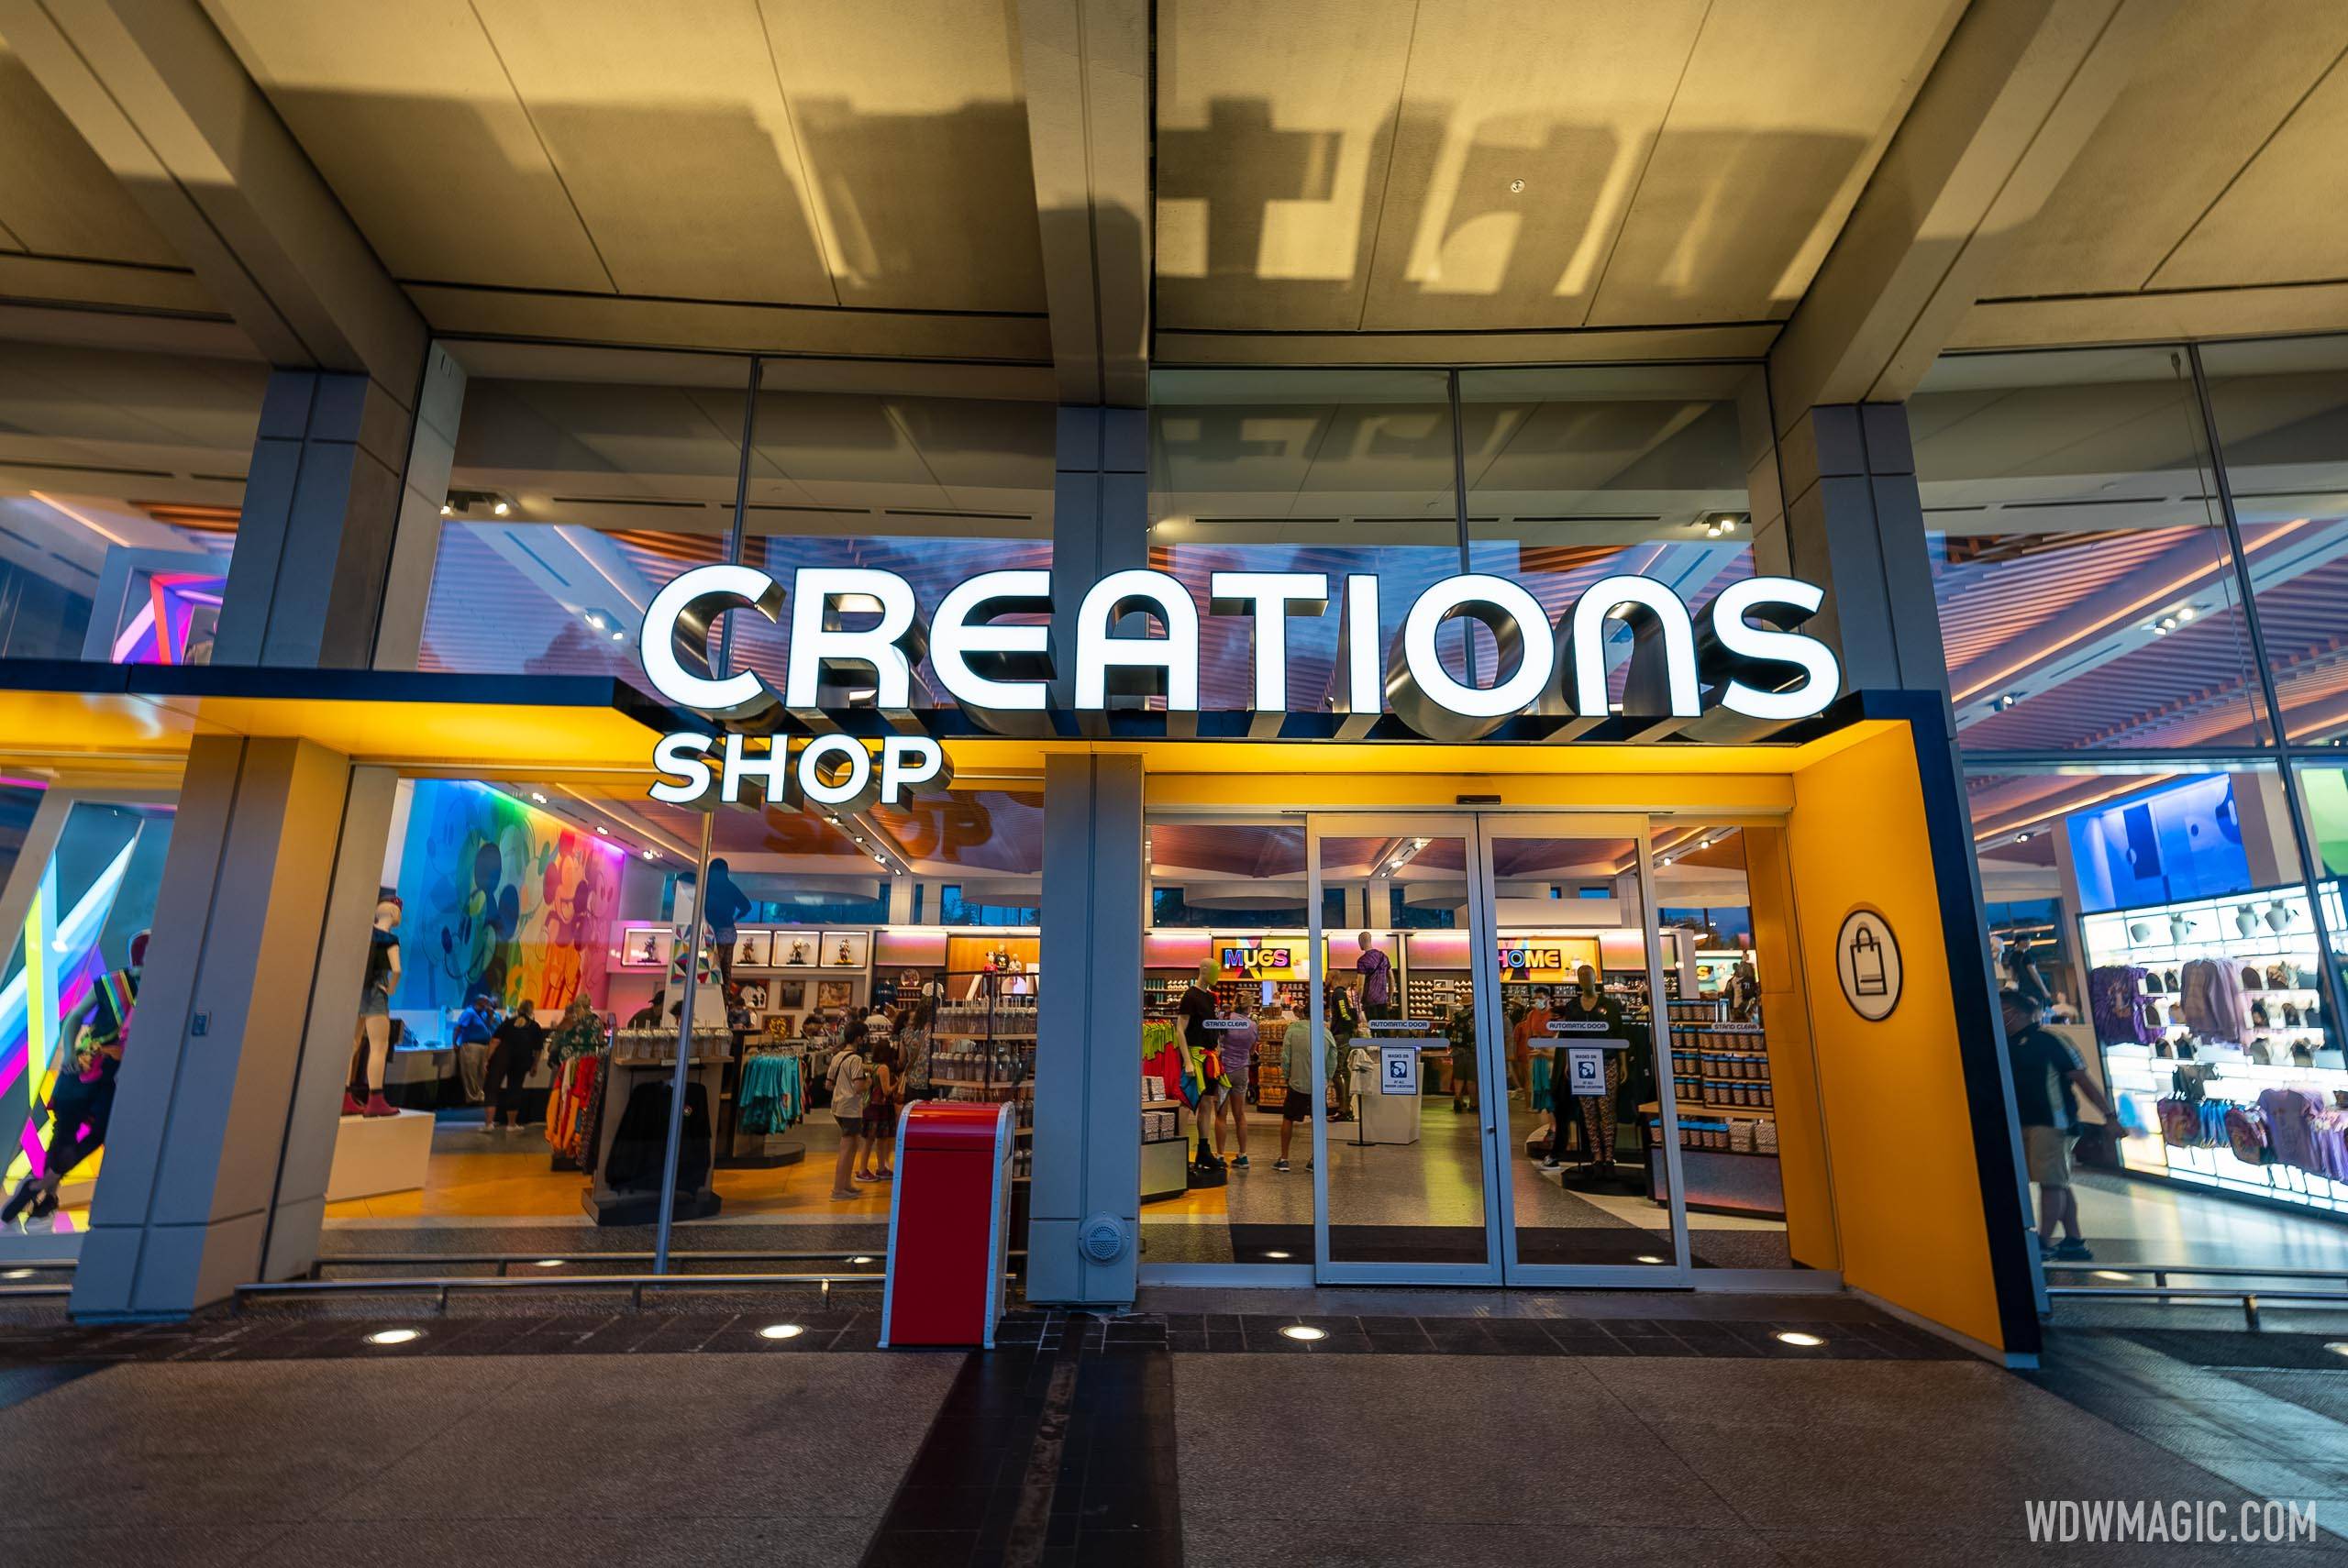 Creations Shop lighting package